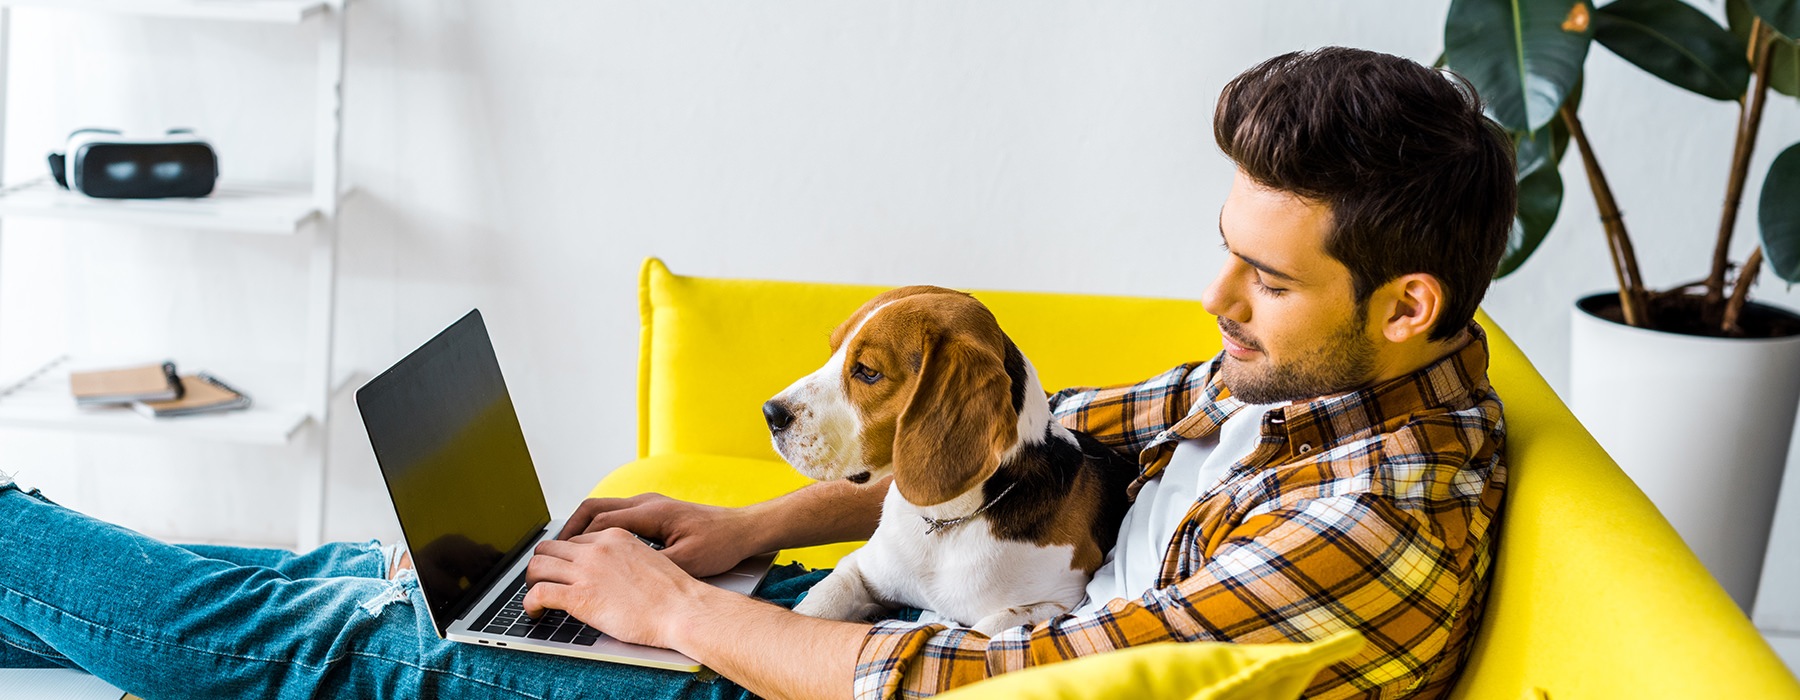 man with dog looking at laptop